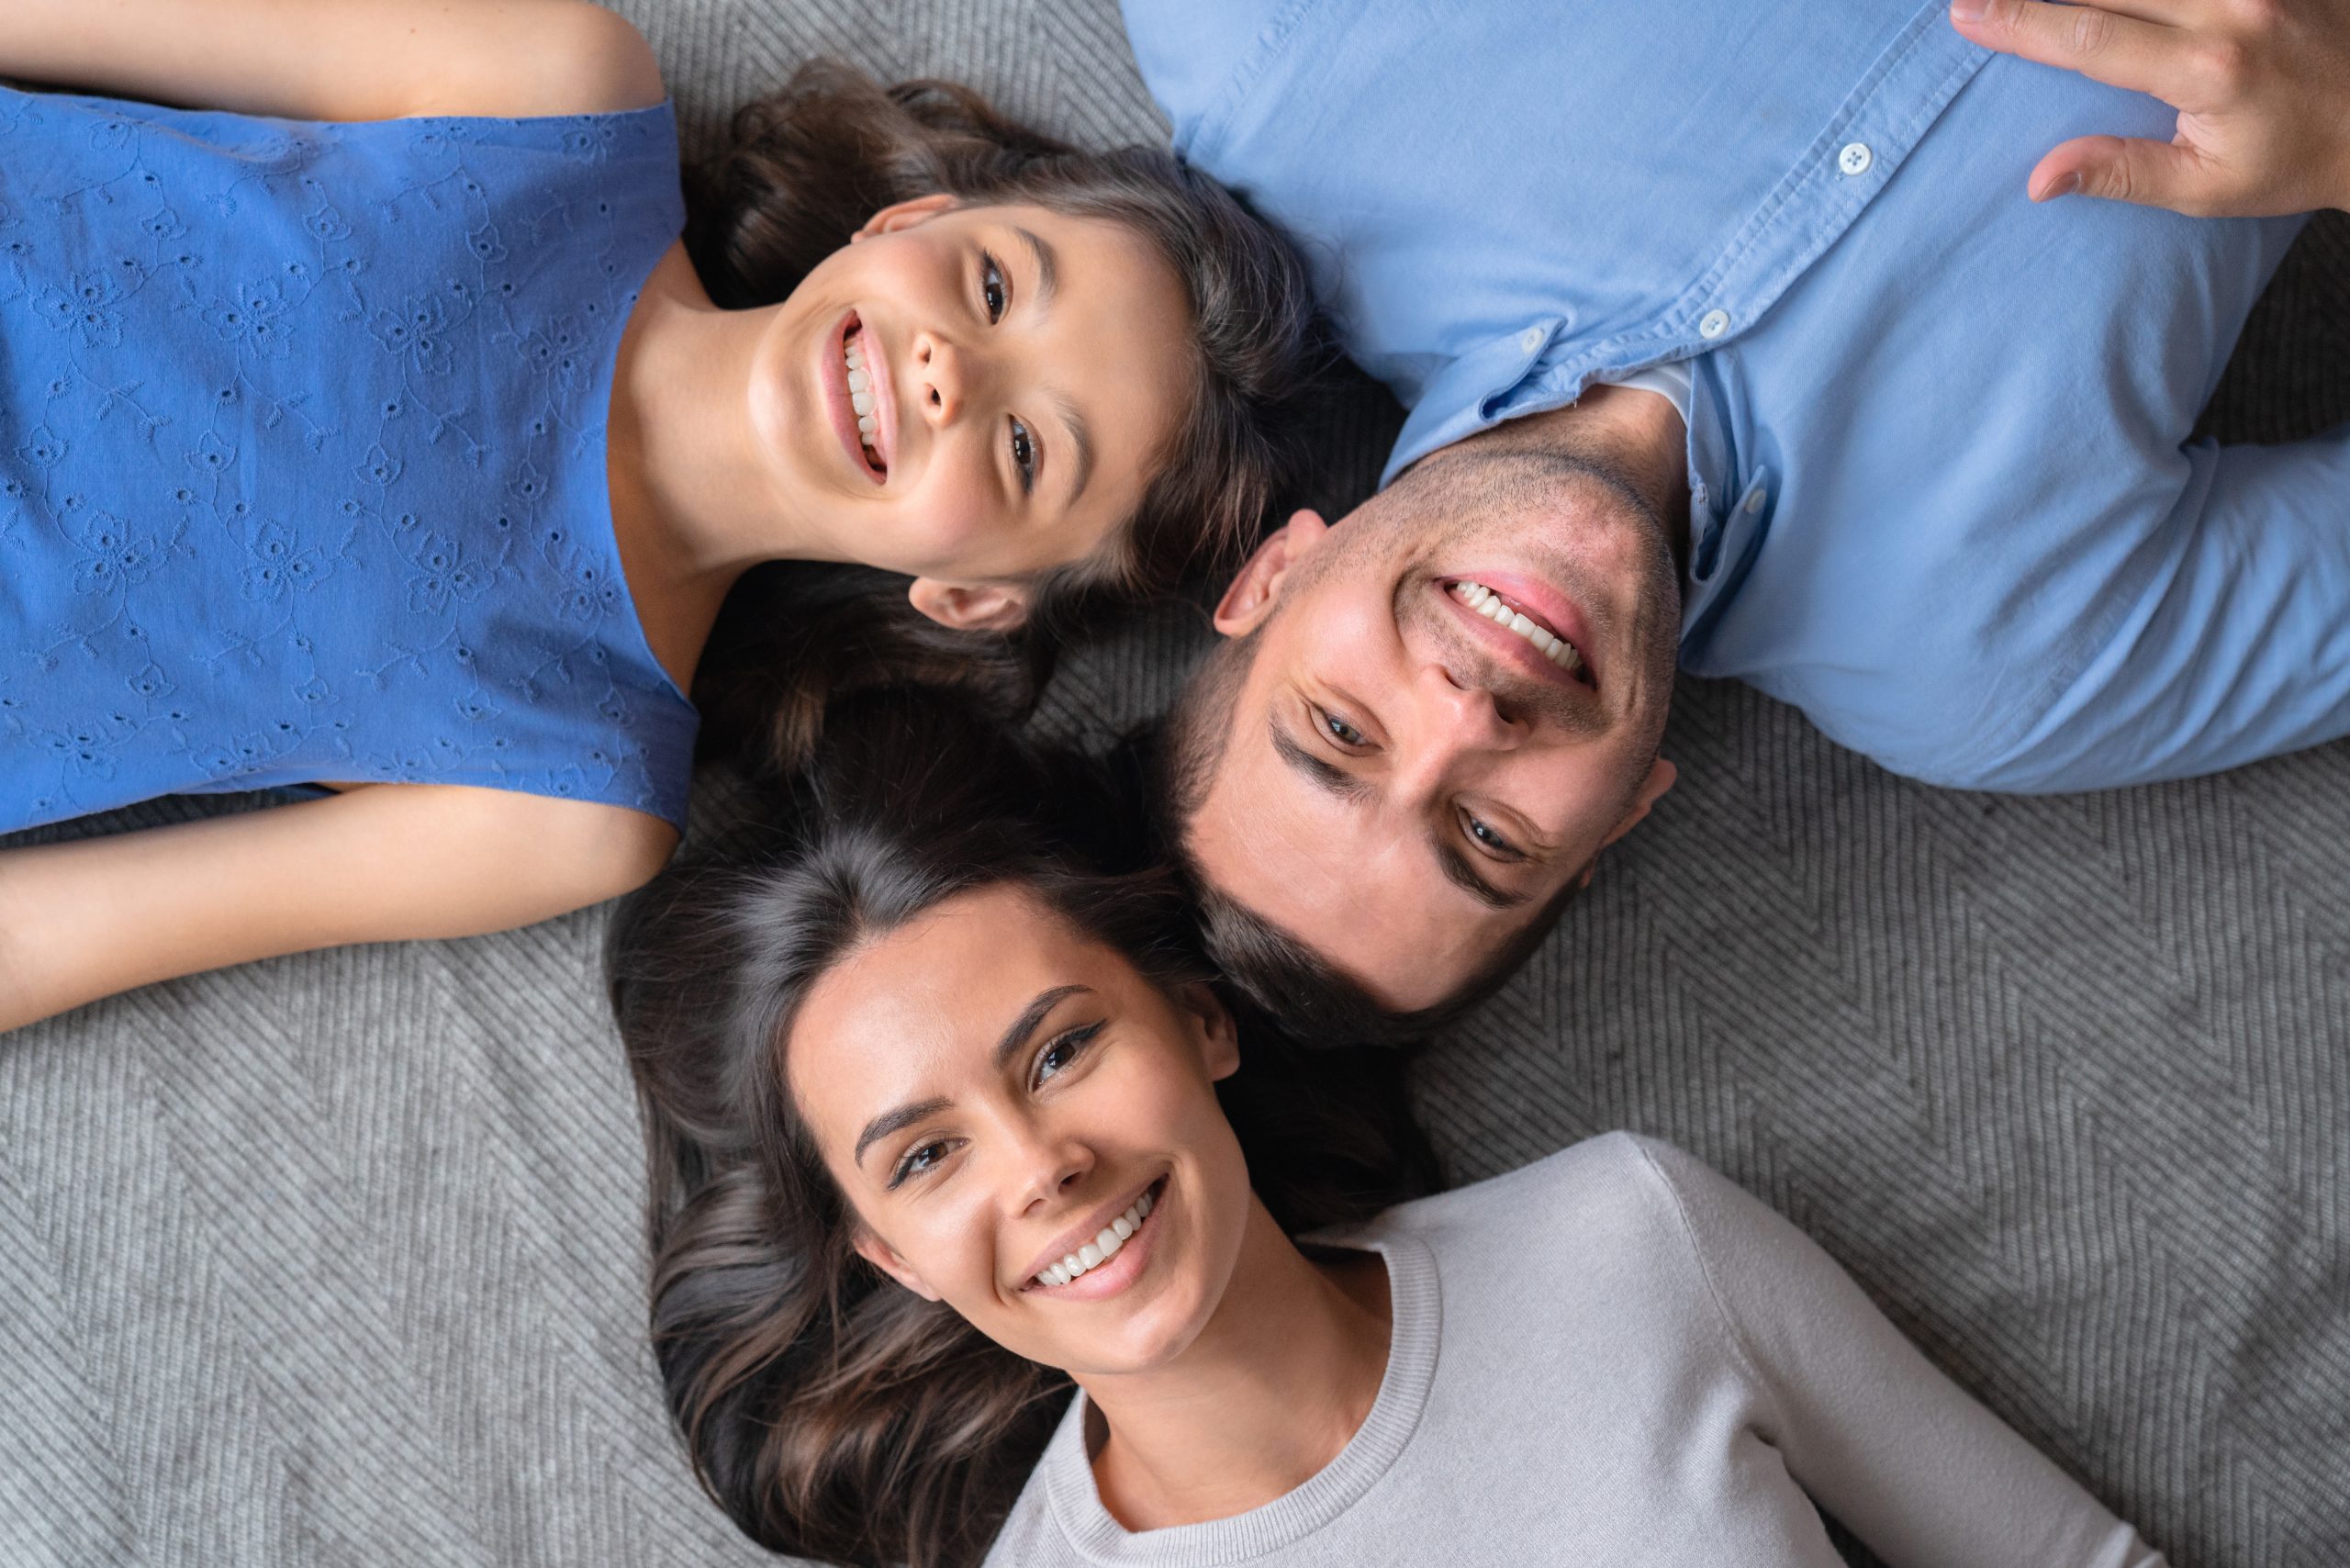 Happy family concept. Top view of happy family of three bonding to each other and smiling while lying on the floor